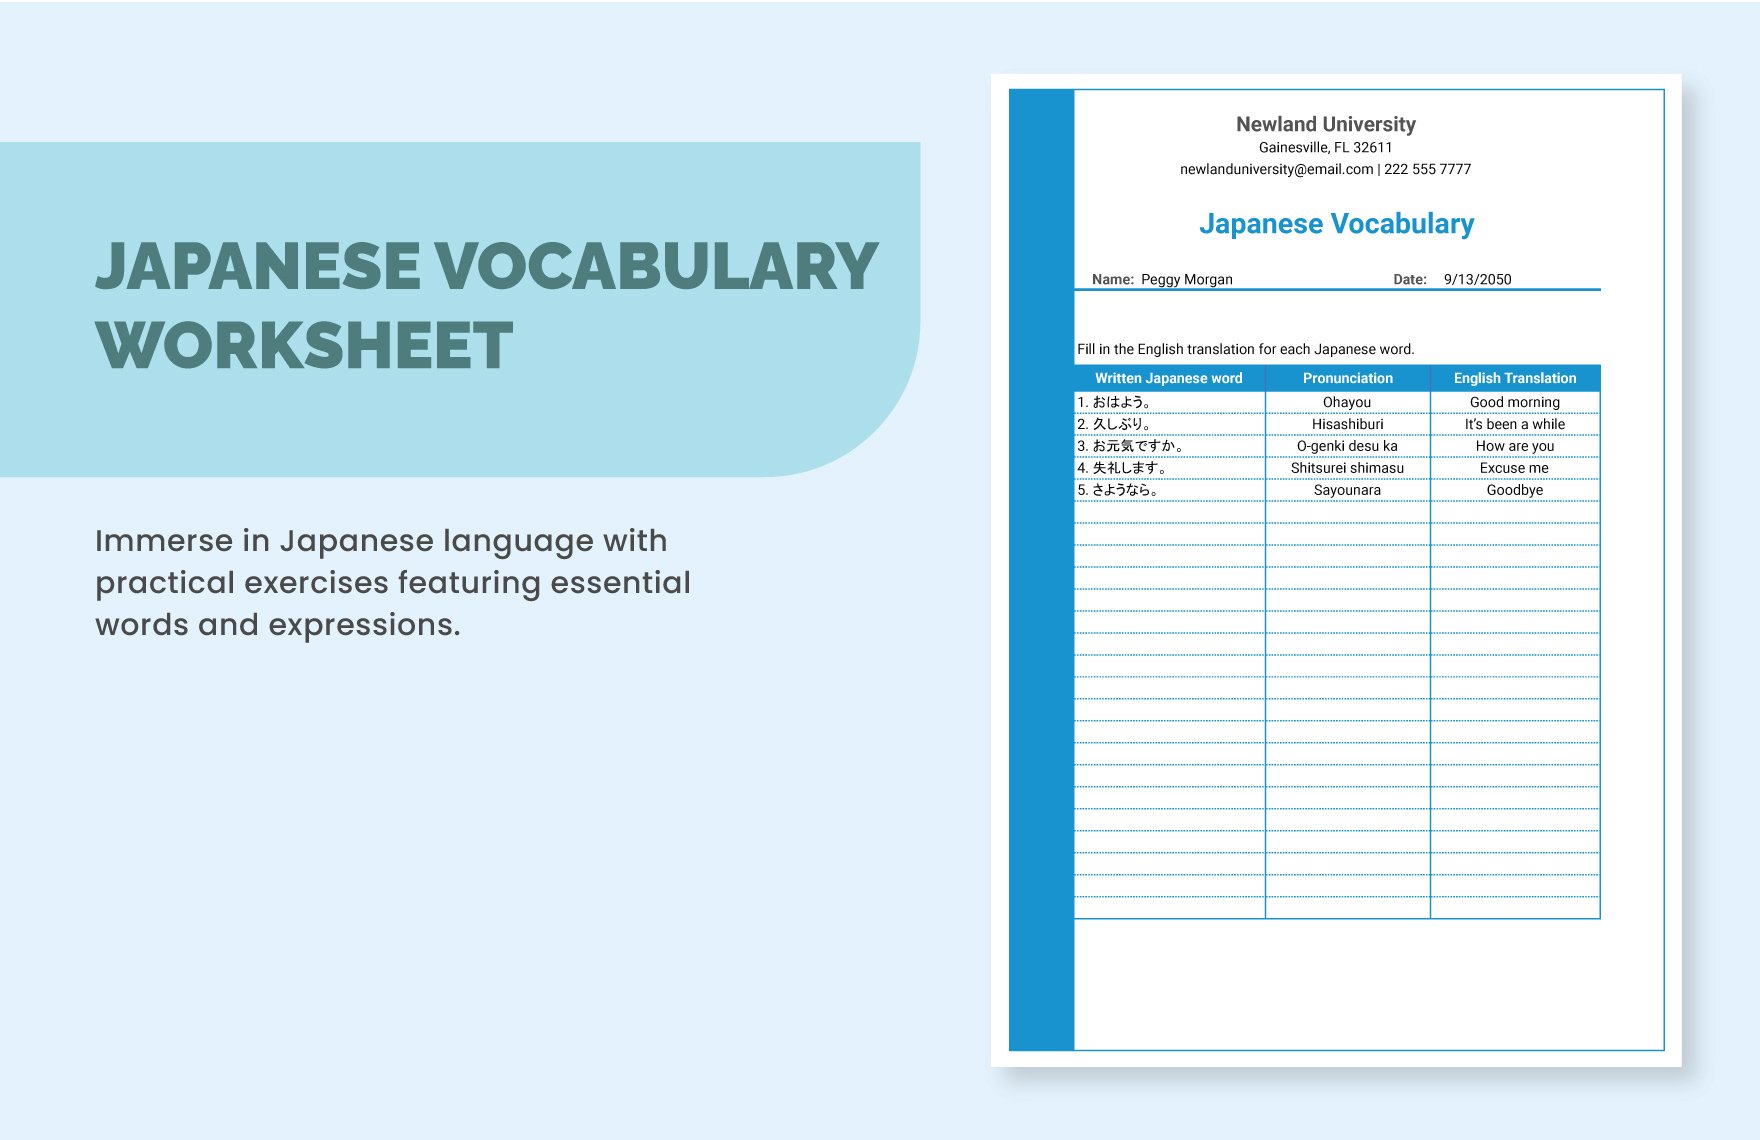 Japanese Vocabulary Worksheet in Excel, Google Sheets